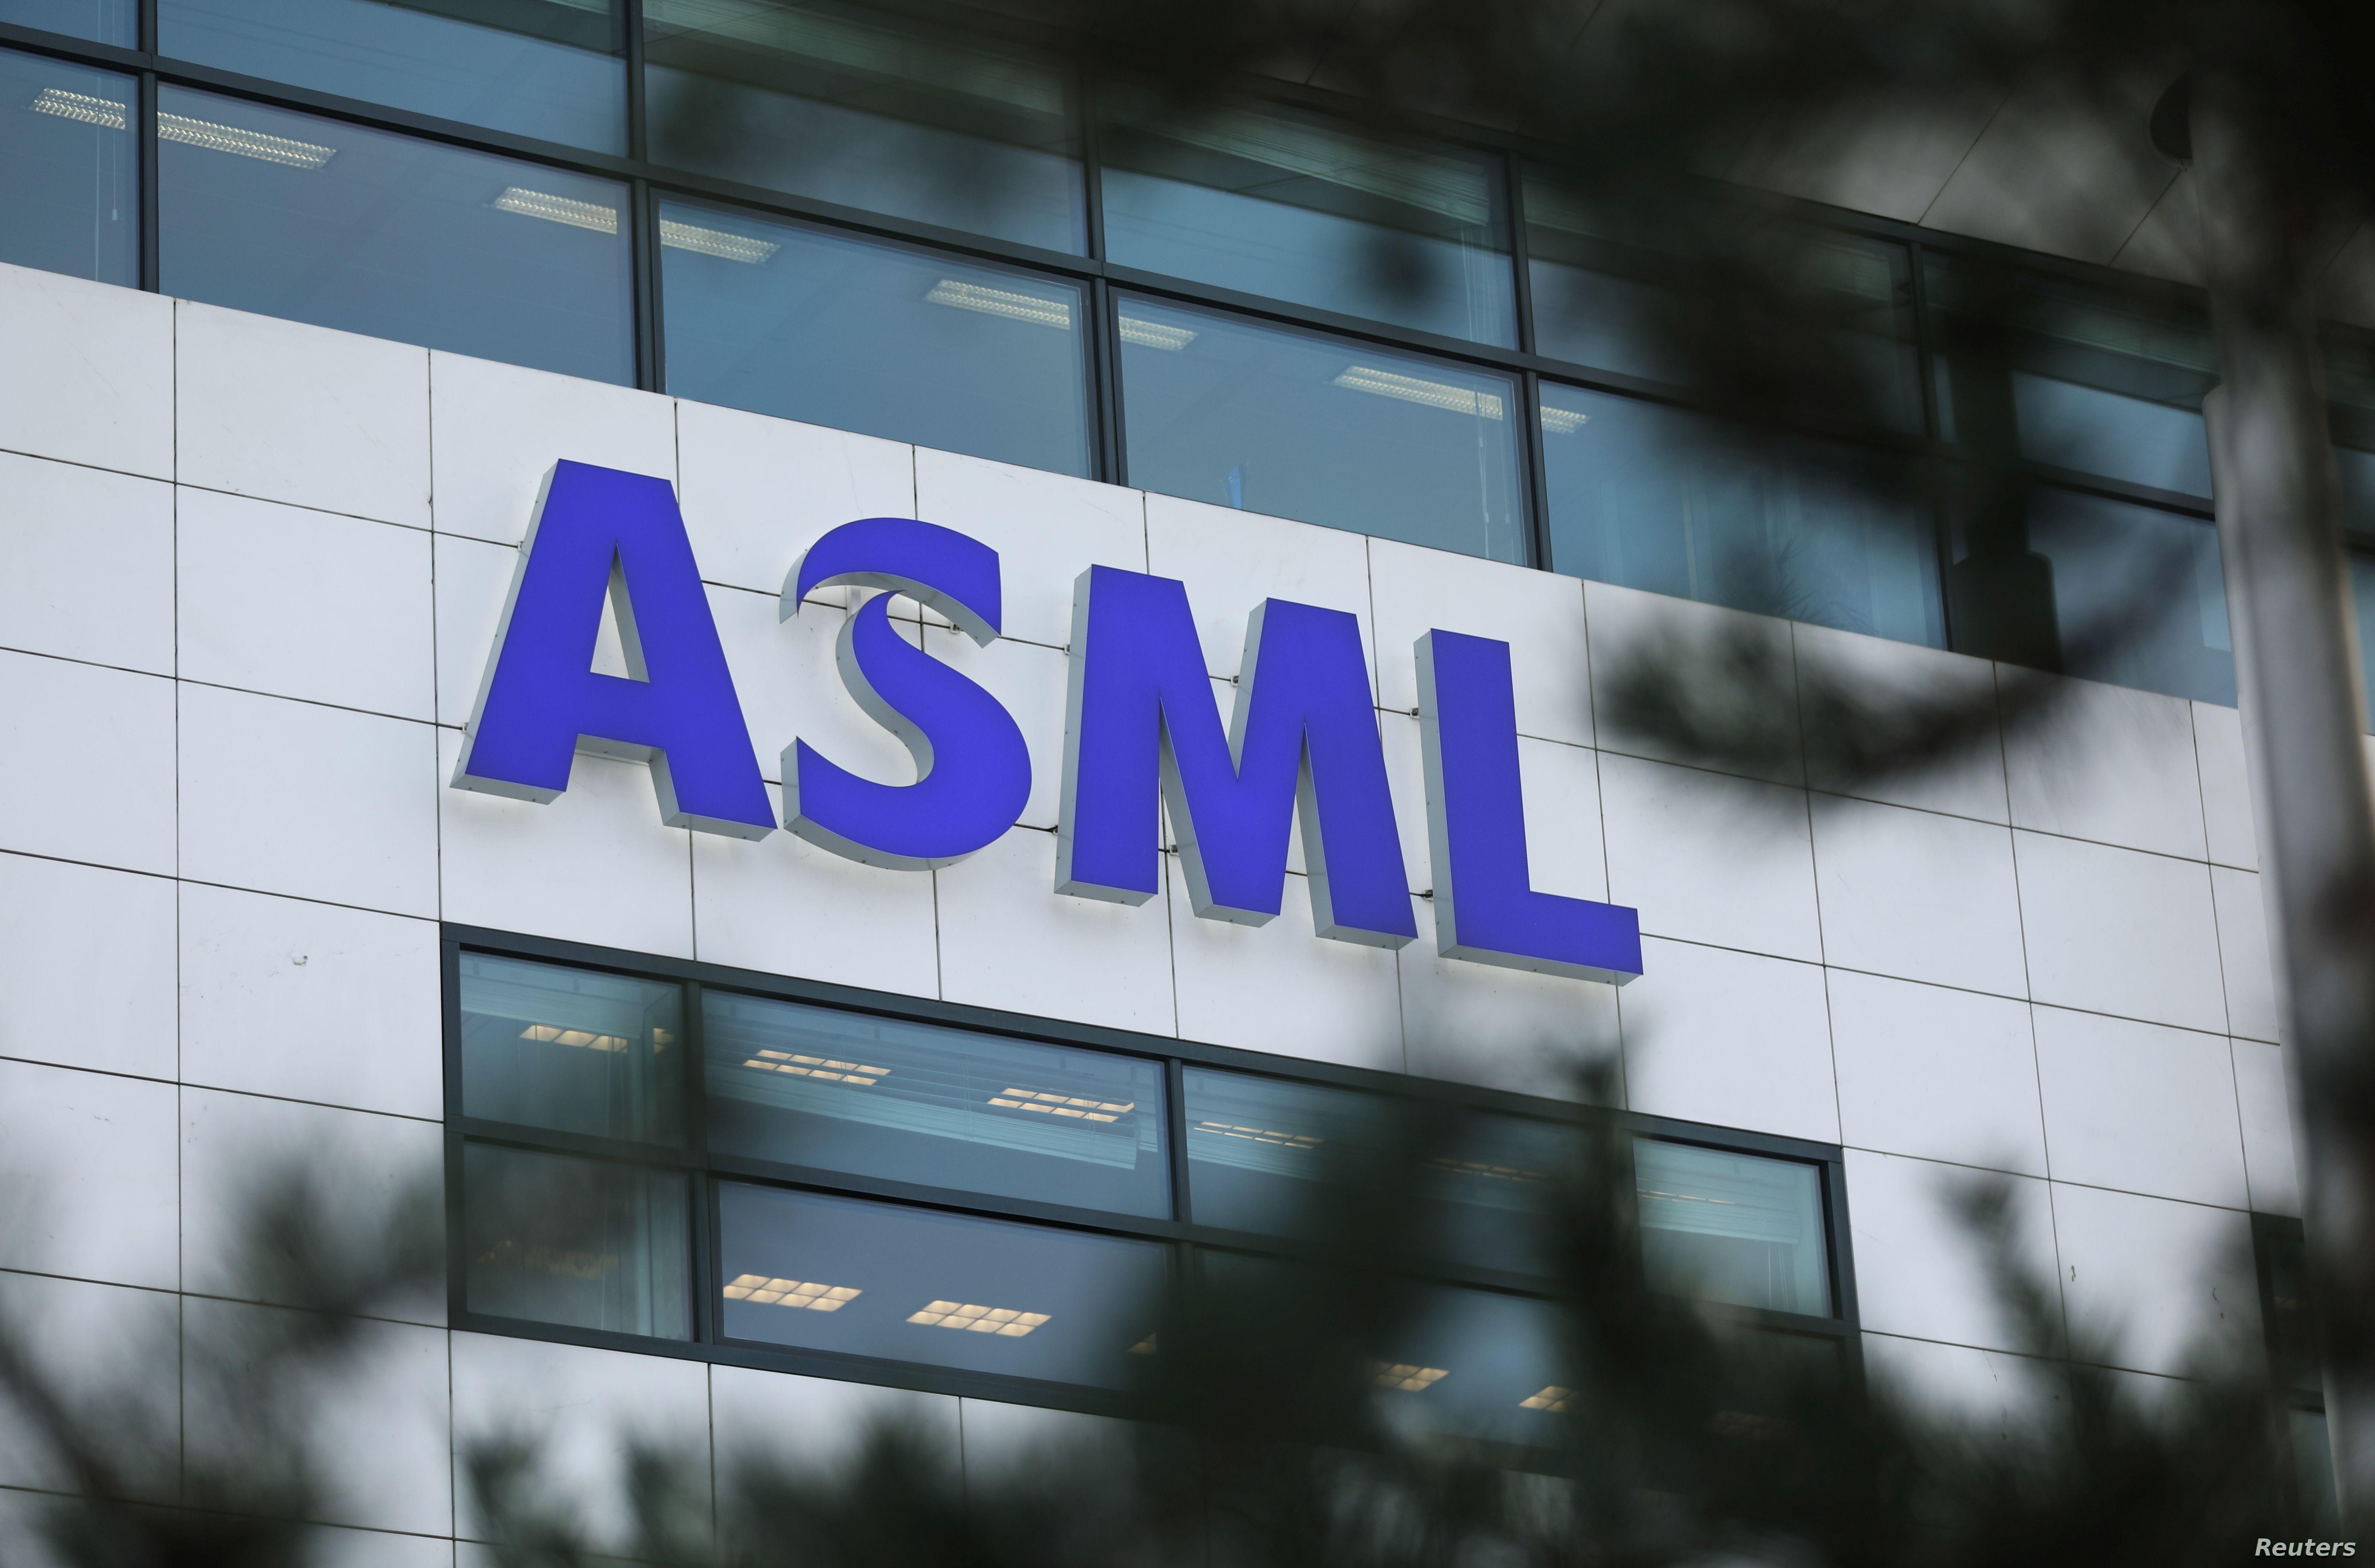 ASML Logo - Dutch Firm ASML Says It Suffered IP Theft, Rejects 'Chinese' Link ...